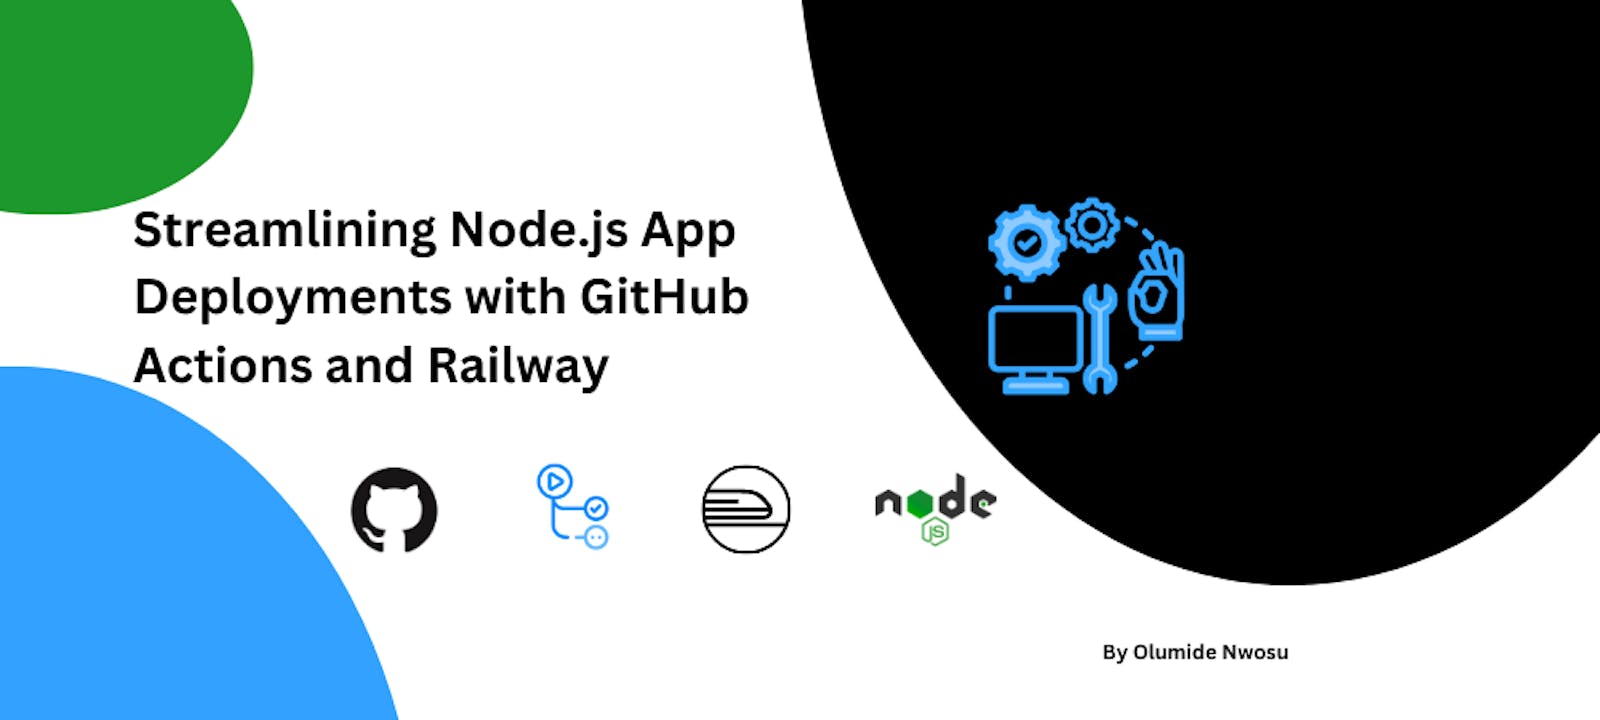 Streamlining Node.js App Deployments with GitHub Actions and Railway